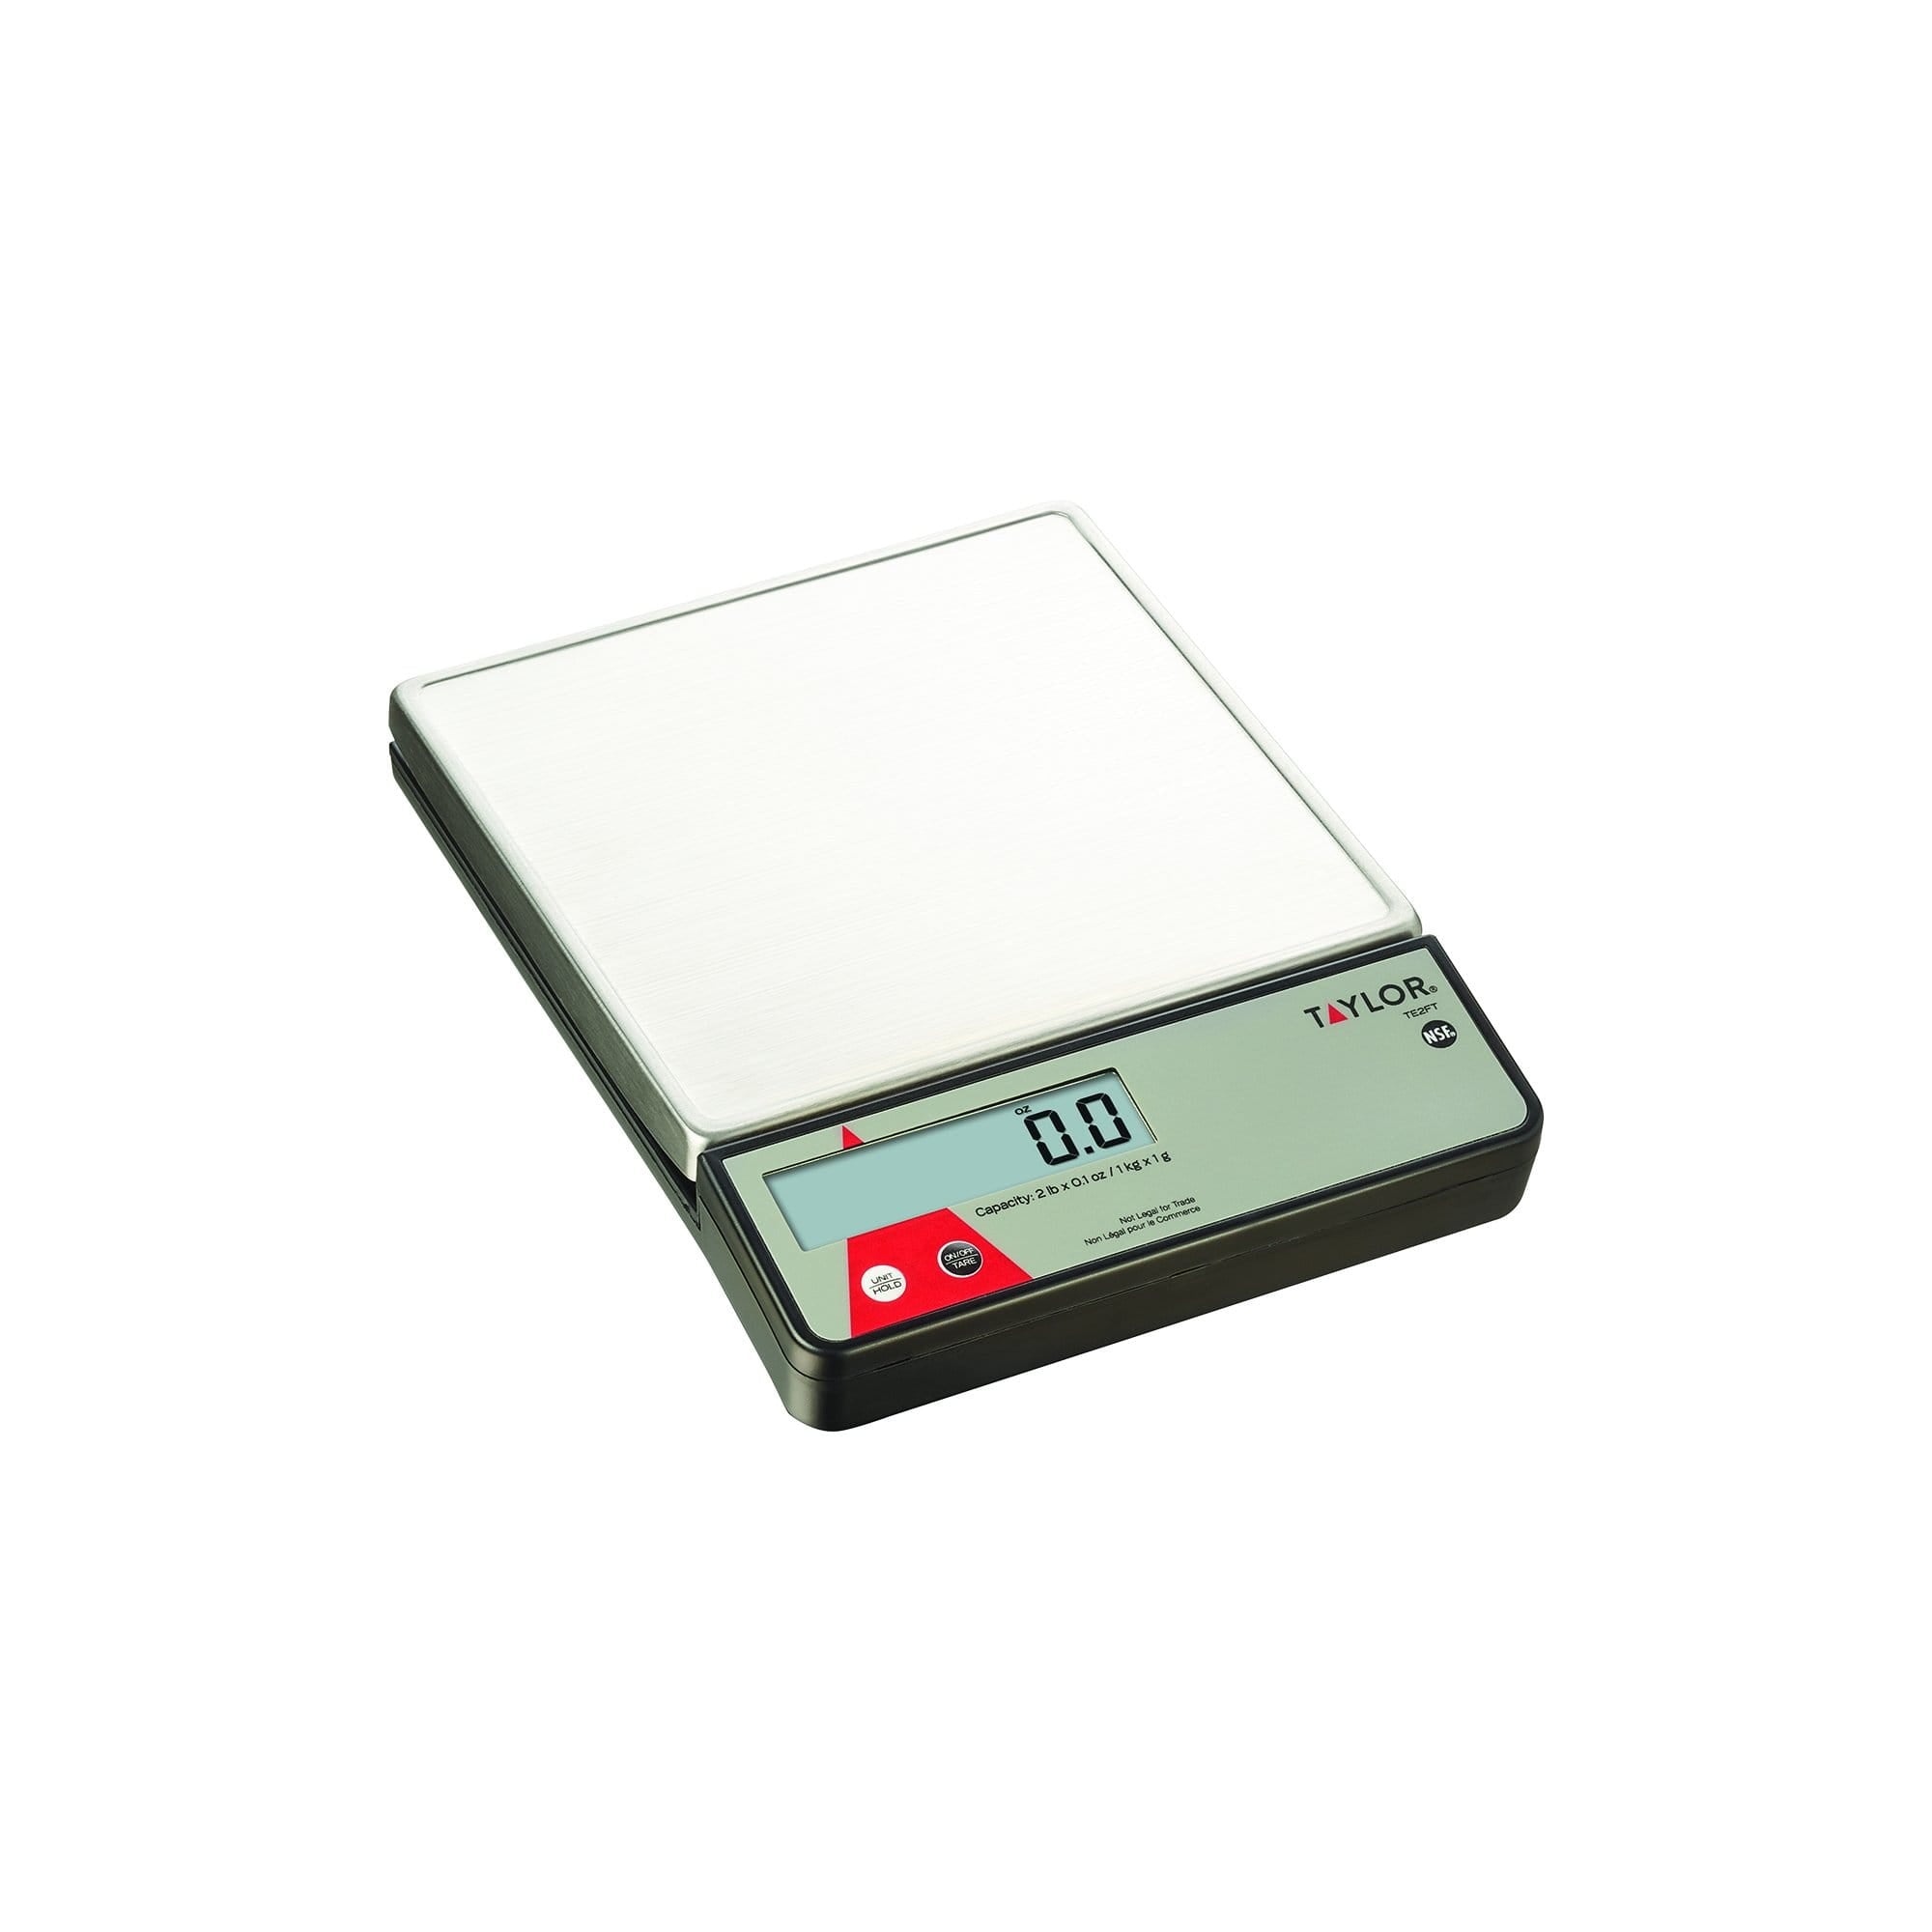 Taylor 11lb Digital Kitchen Scale and Food Scale with Removable